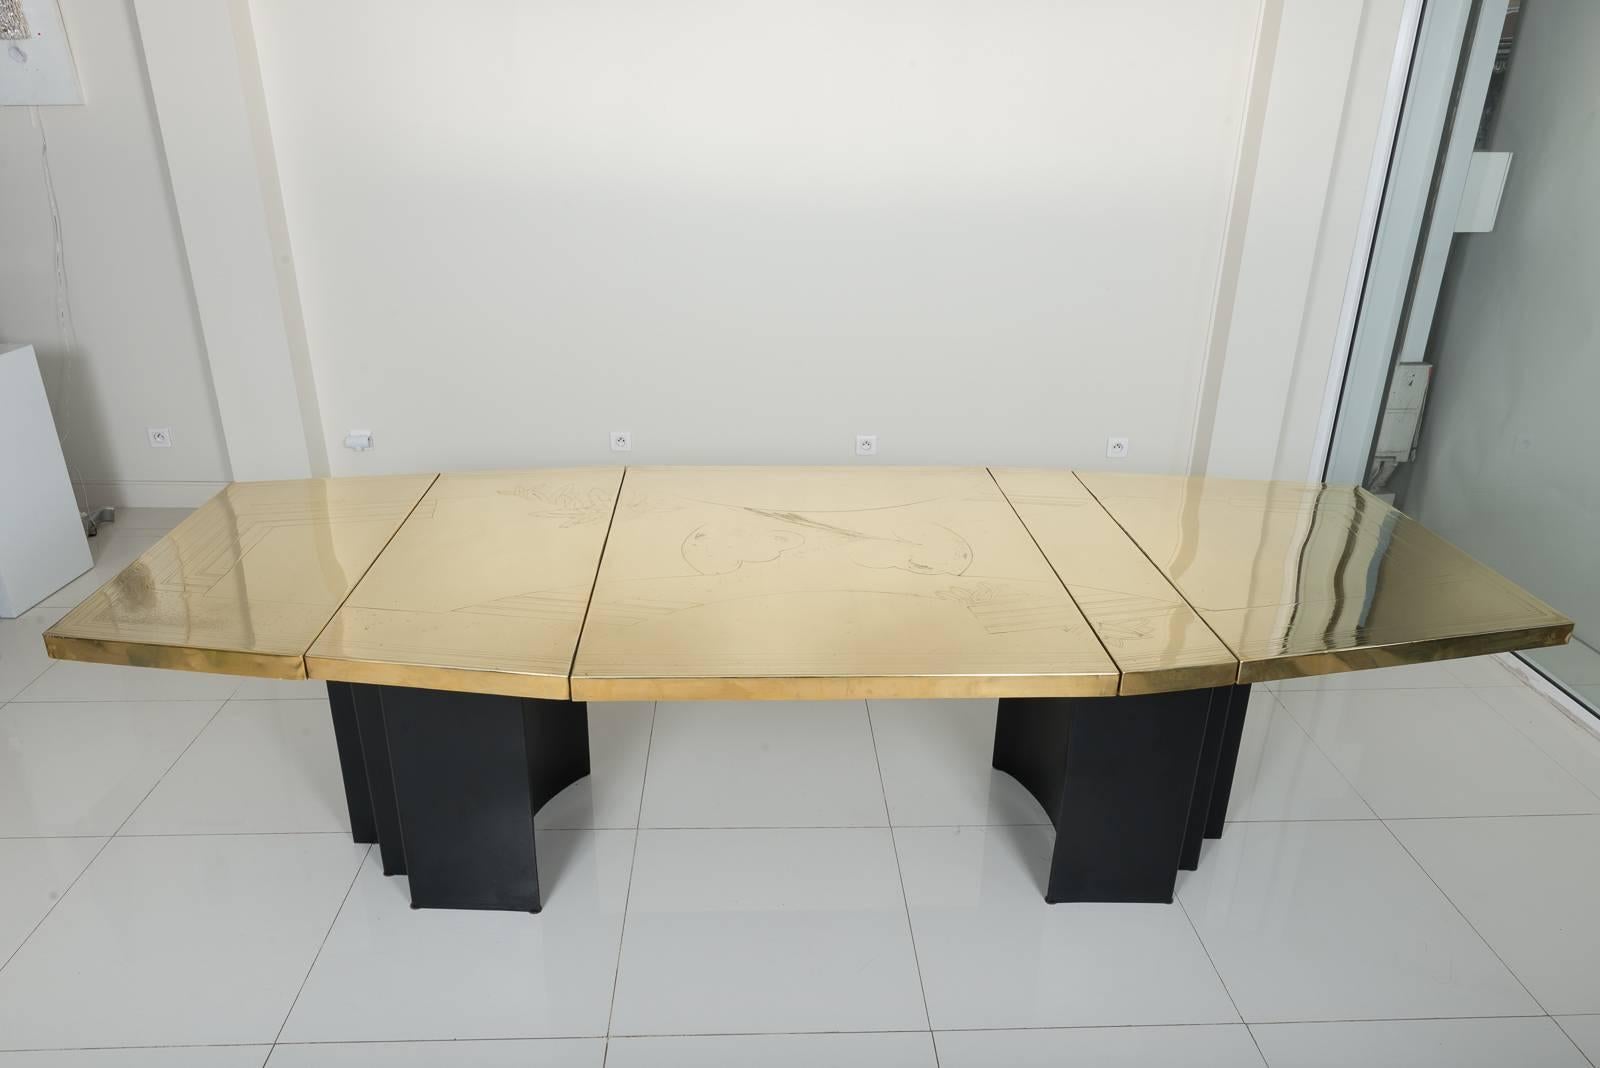 Rare dining table by Christian Heckscher first Production in 1972, unique Piece of him and sign of him.
Engraved top in brass metal, metal feet black, motif abstract geometrique.
This dinning table is a sculpture of him.
The table a few